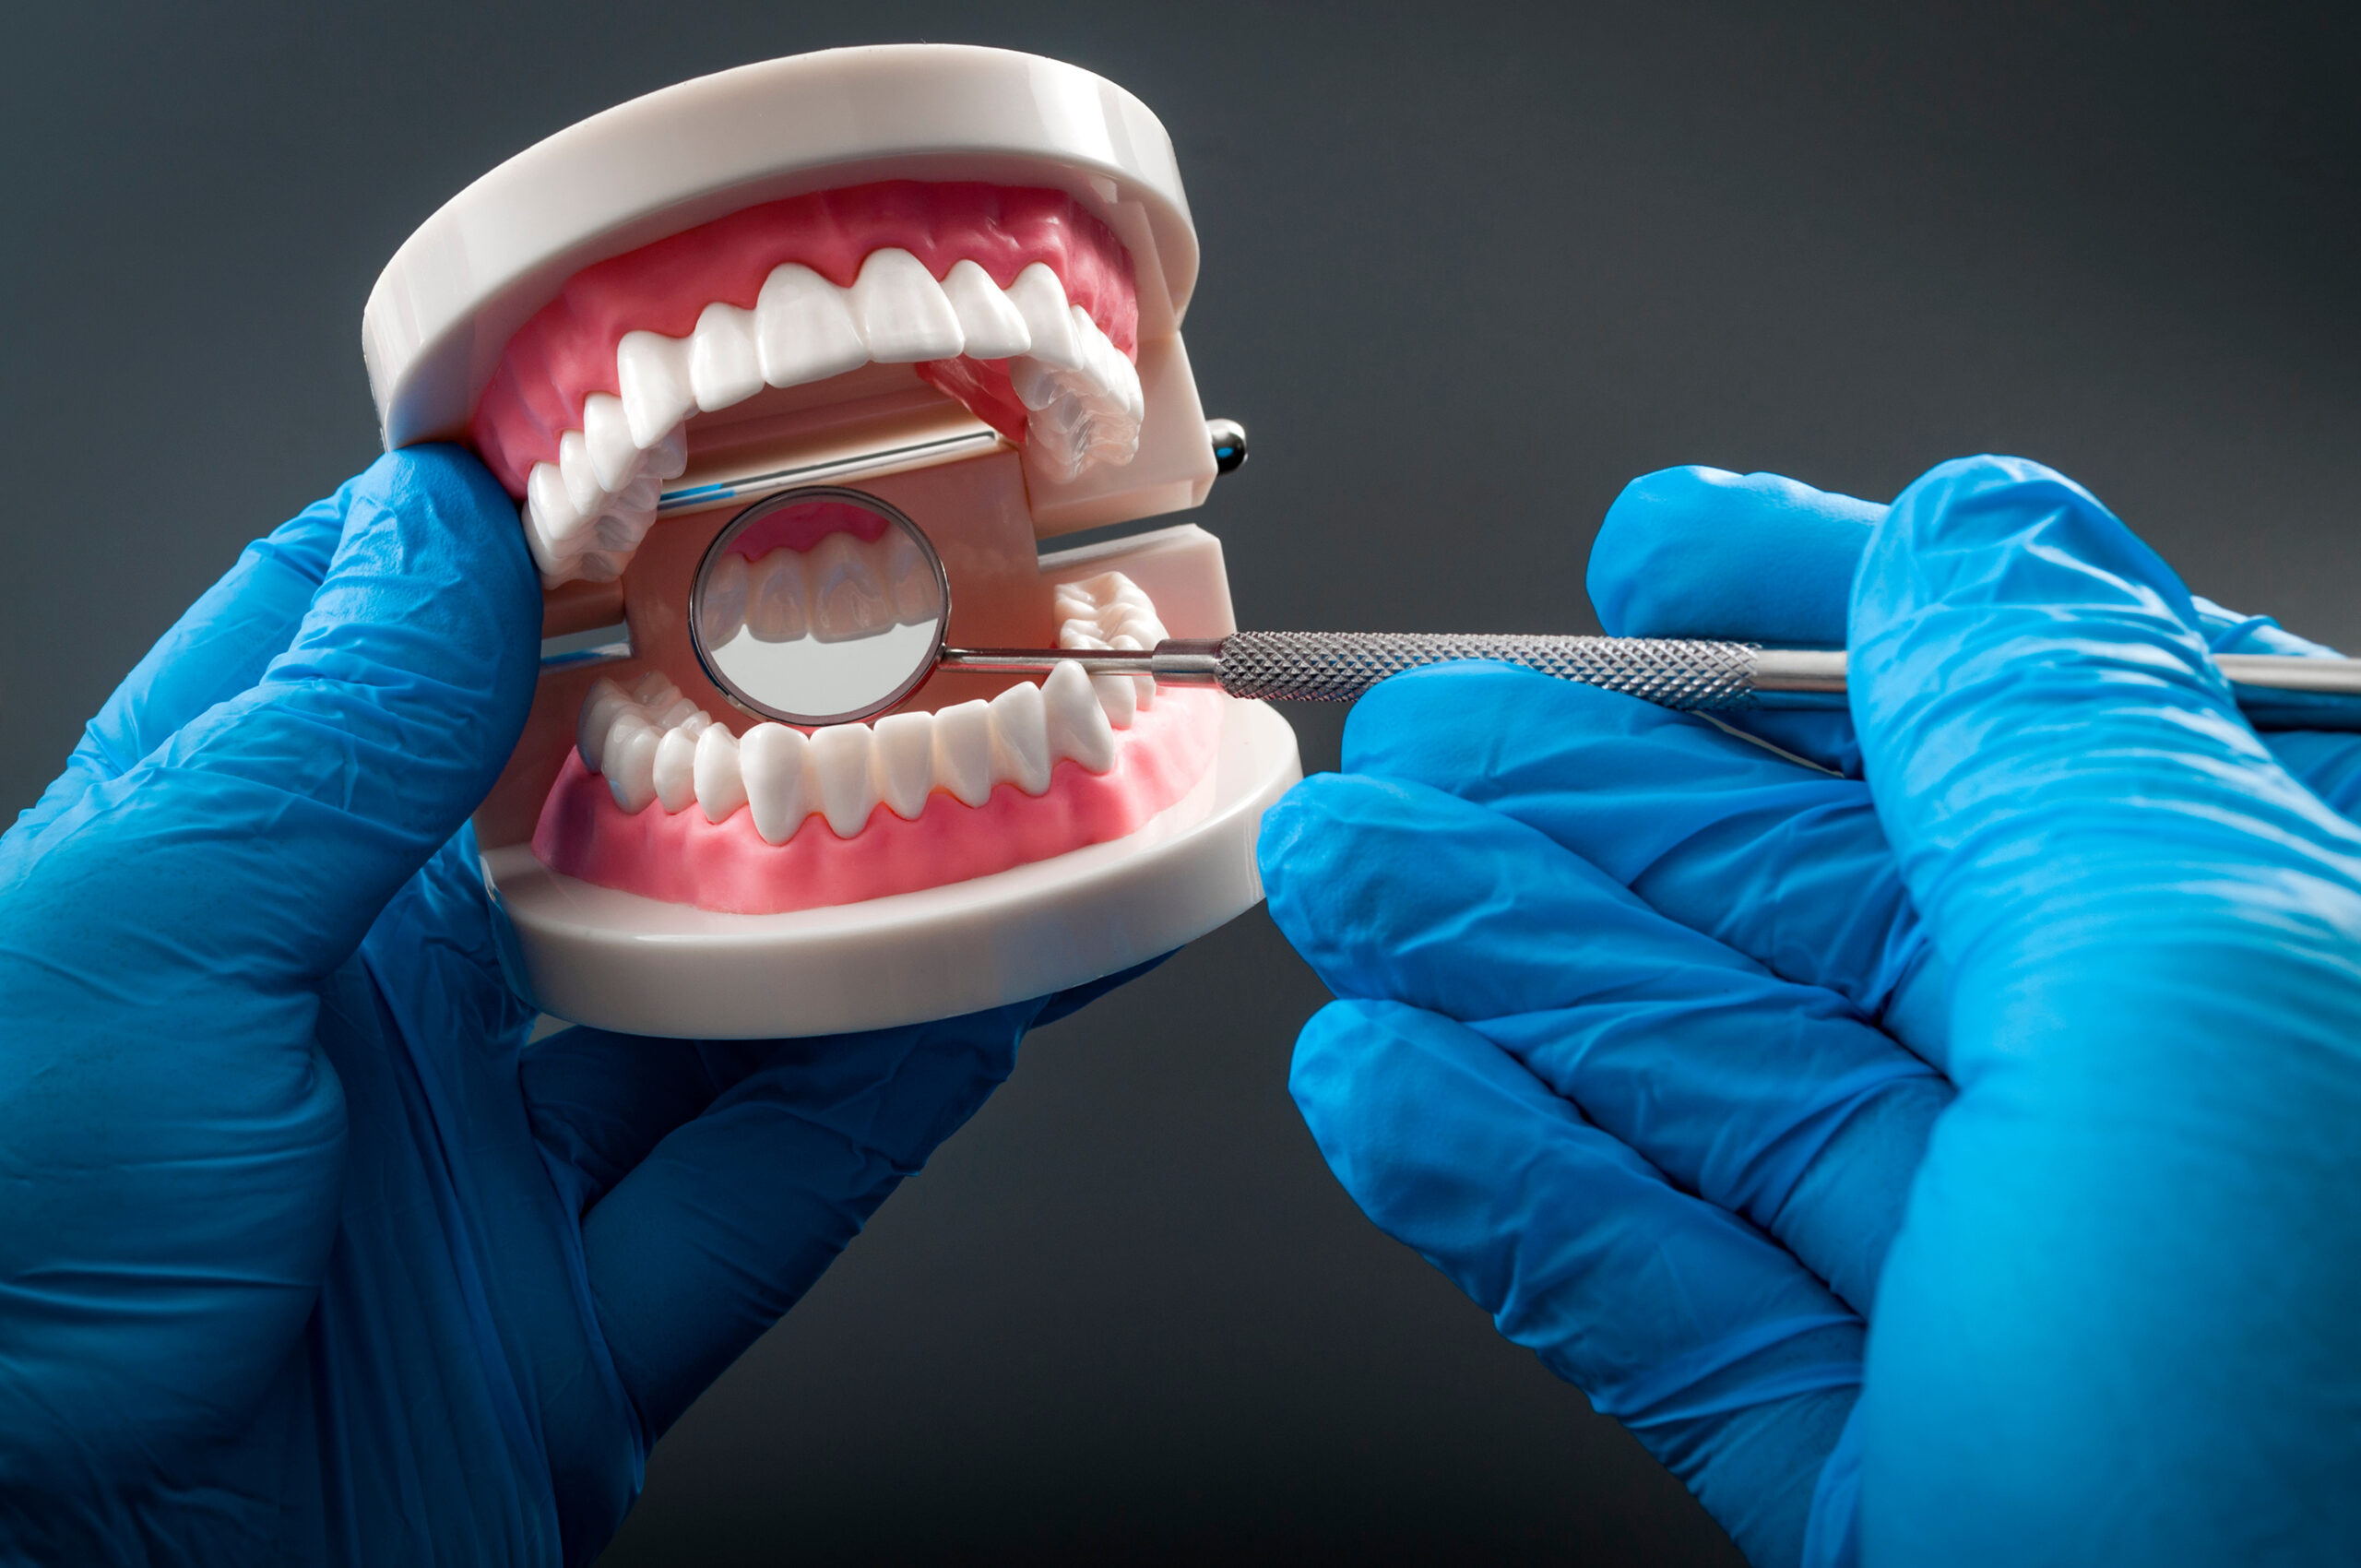 Stomatology appointment, dentistry instruments and dental hygienist checkup concept with dentist wearing latex gloves, teeth model dentures, mouth mirror. Regular checkups are essential to oral health